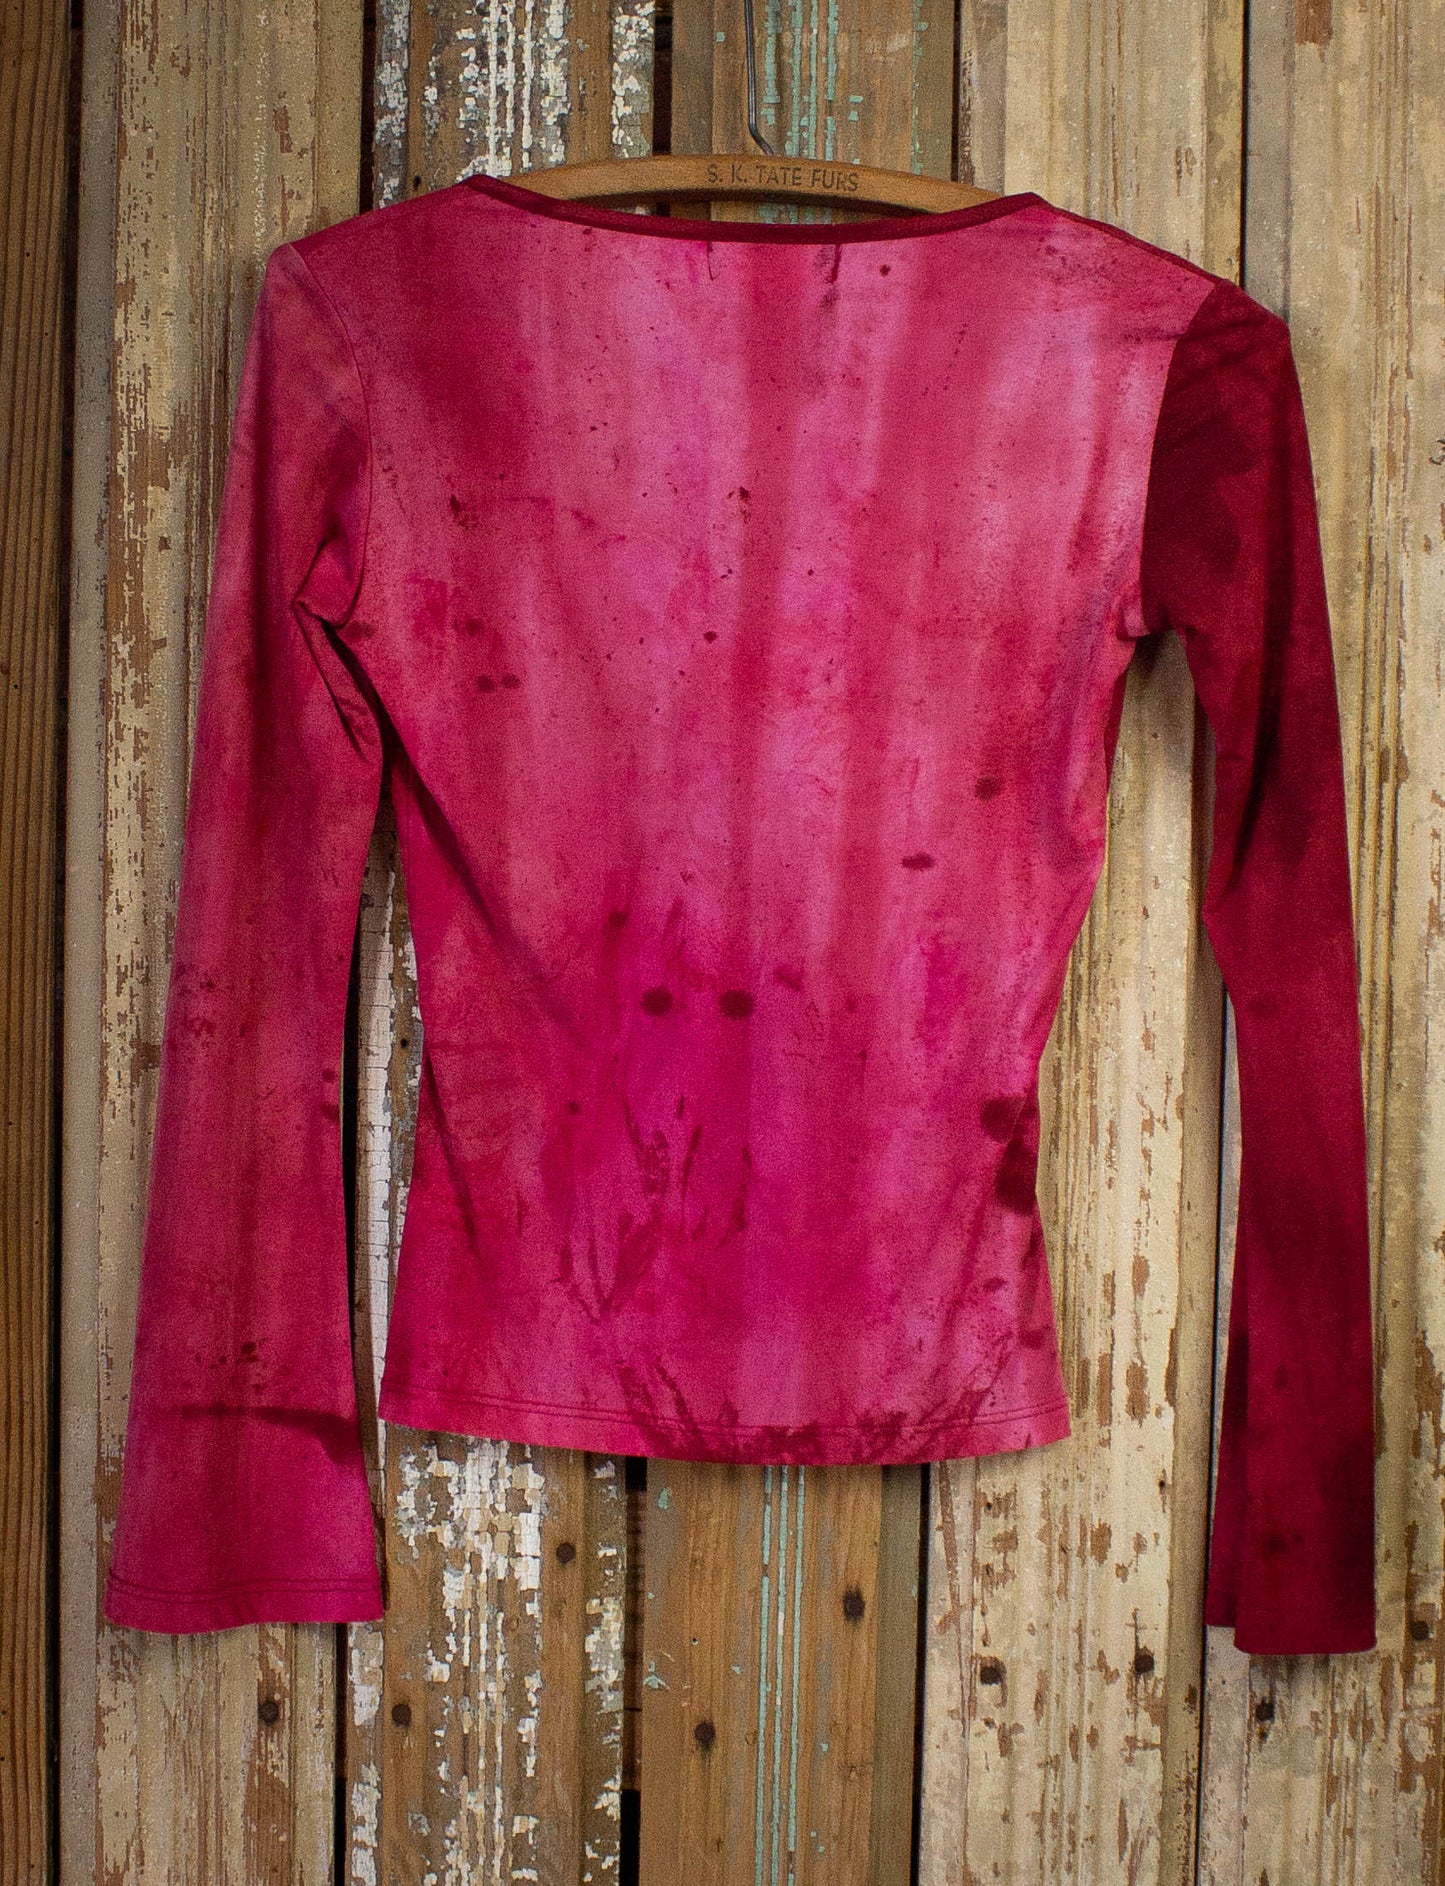 Vintage Wanted Red Lace Up Top 1980s S